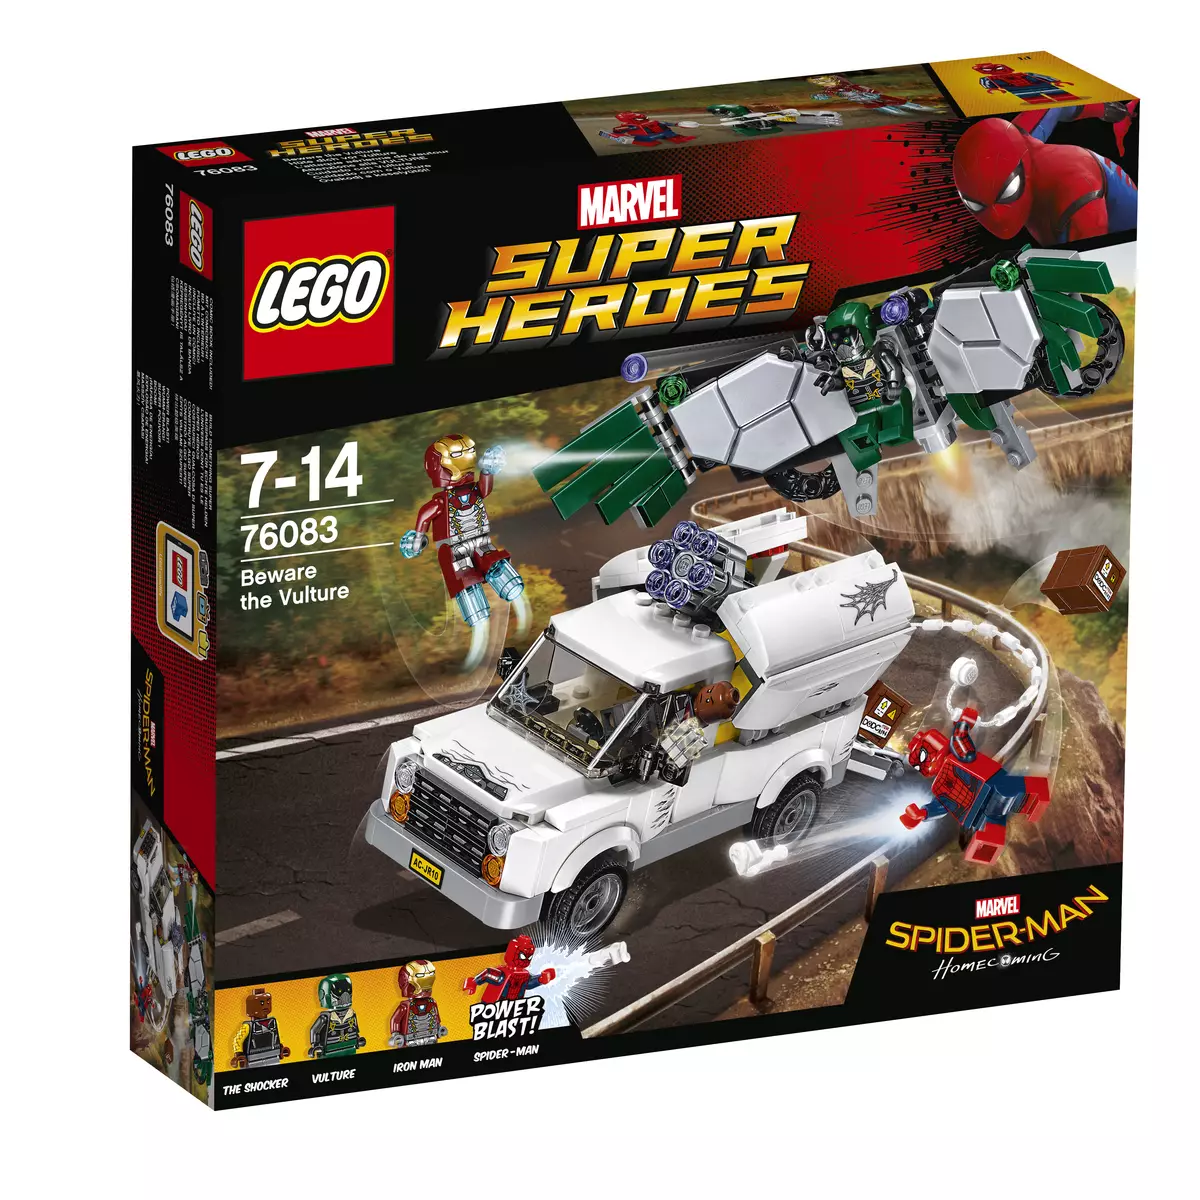 LEGO presented a new collection of toys in honor of 